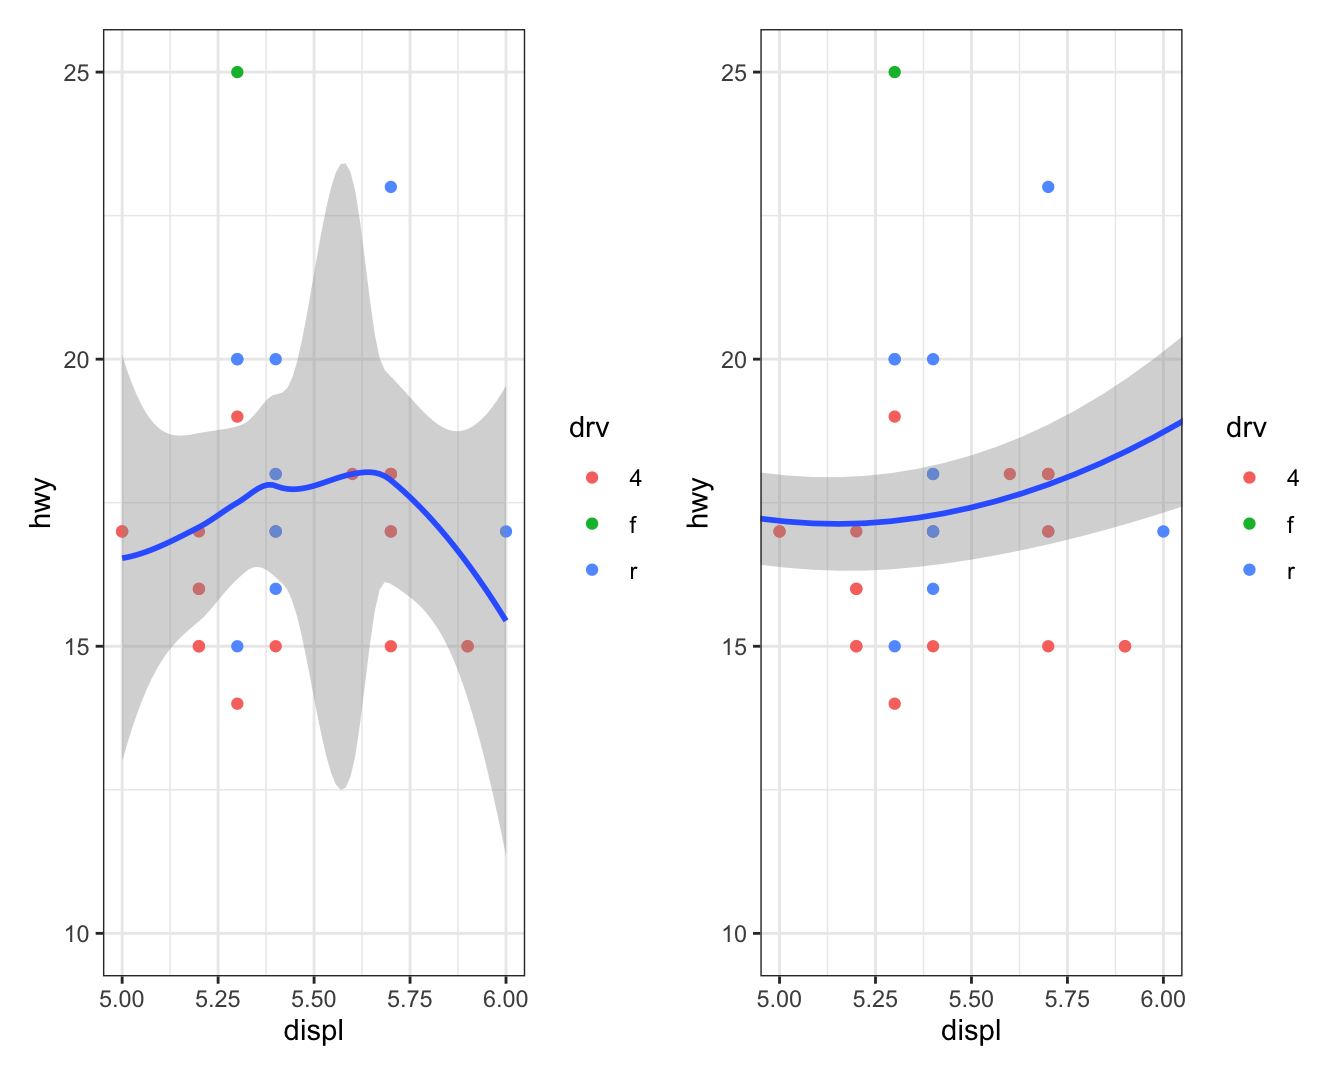 On the left, scatterplot of highway mileage vs. displacement, with
displacement ranging from 5 to 6 and highway mileage ranging from
10 to 25. The smooth curve overlaid shows a trend that's slightly
increasing first and then decreasing. On the right, same variables
are plotted with the same limits, however the smooth curve overlaid
shows a relatively flat trend with a slight increase at the end.